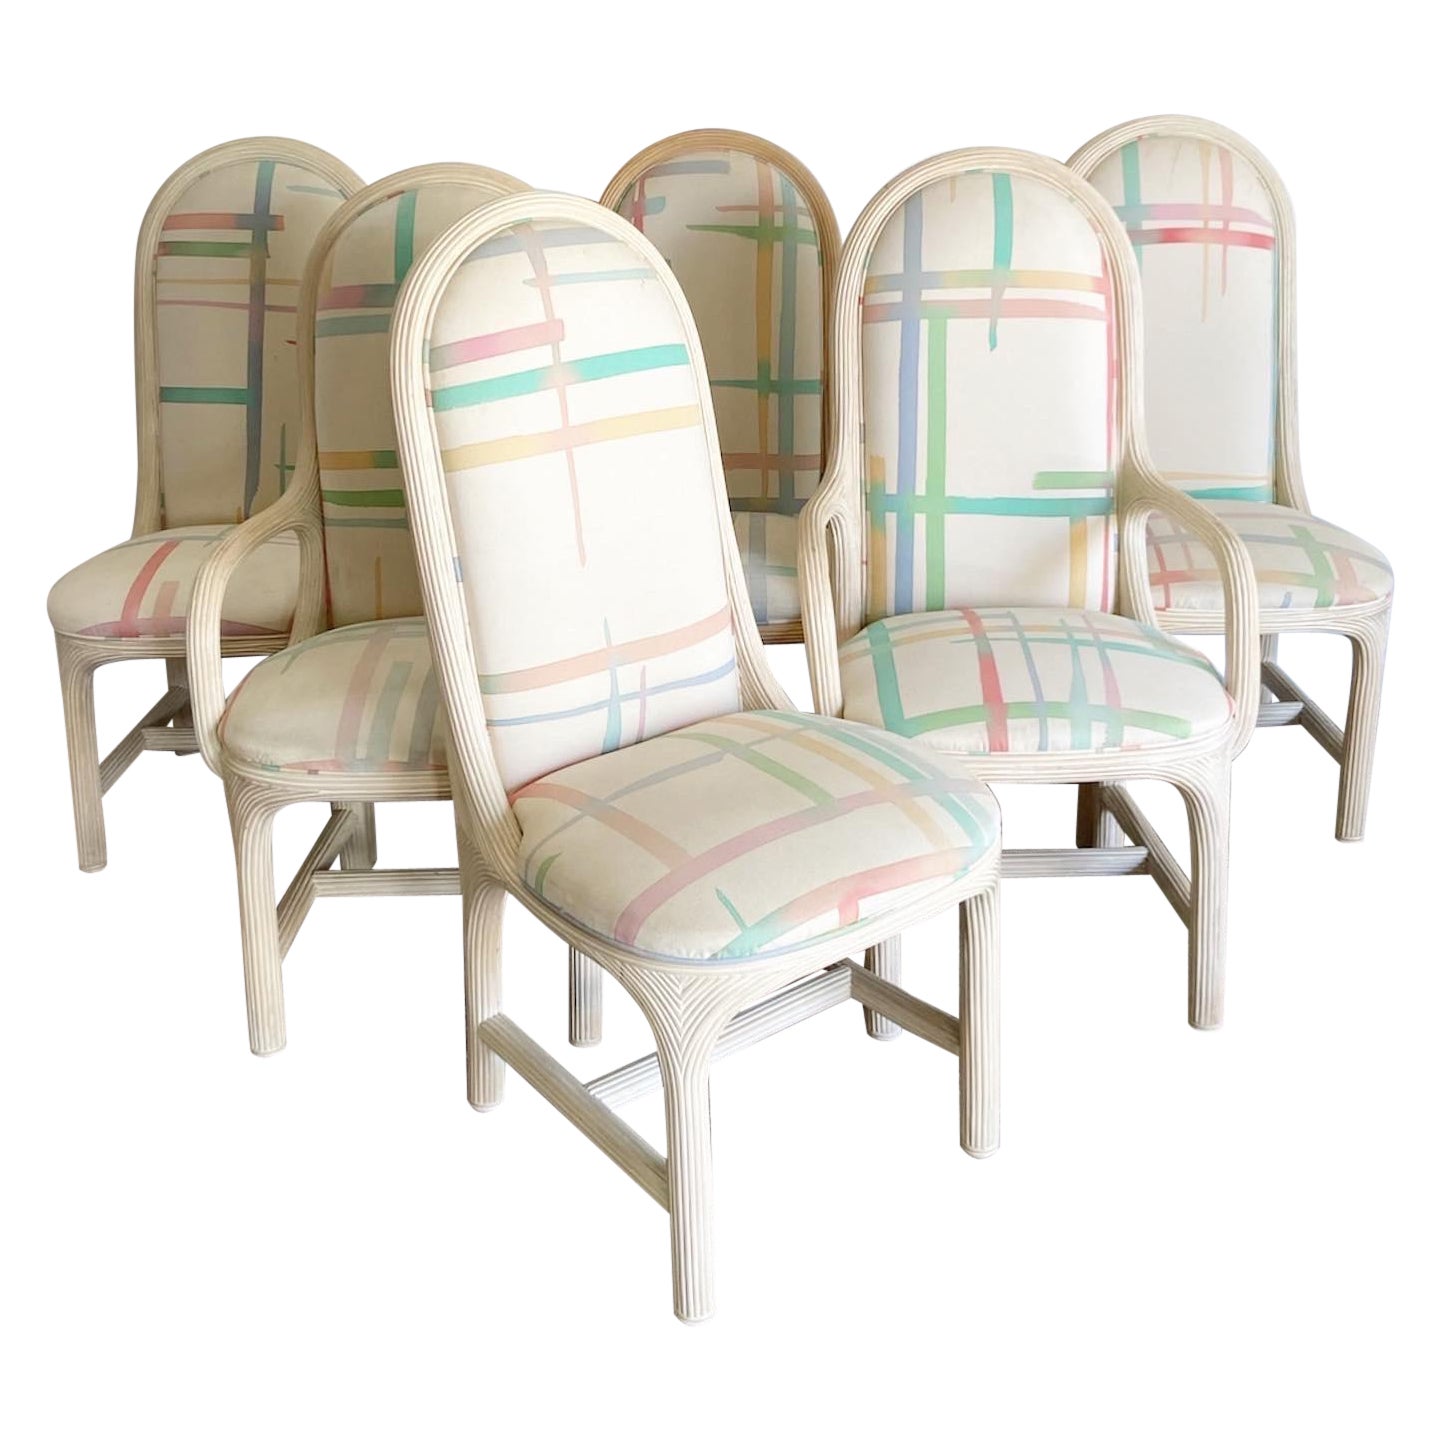 Postmodern Chic Pencil Reed Multi Colored Dining Chairs by American Drew